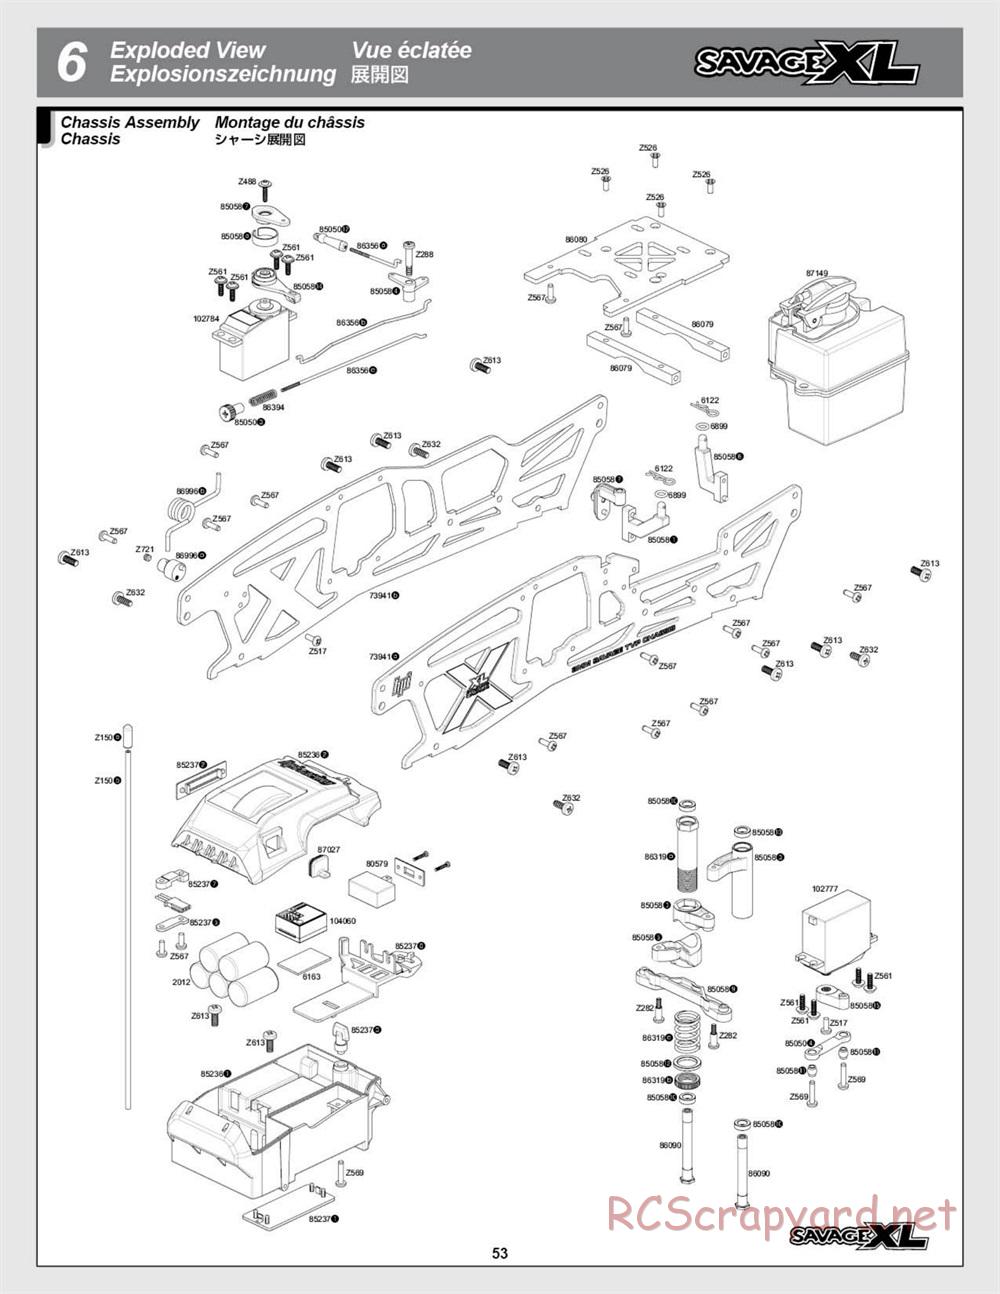 HPI - Savage XL 5.9 - Exploded View - Page 53